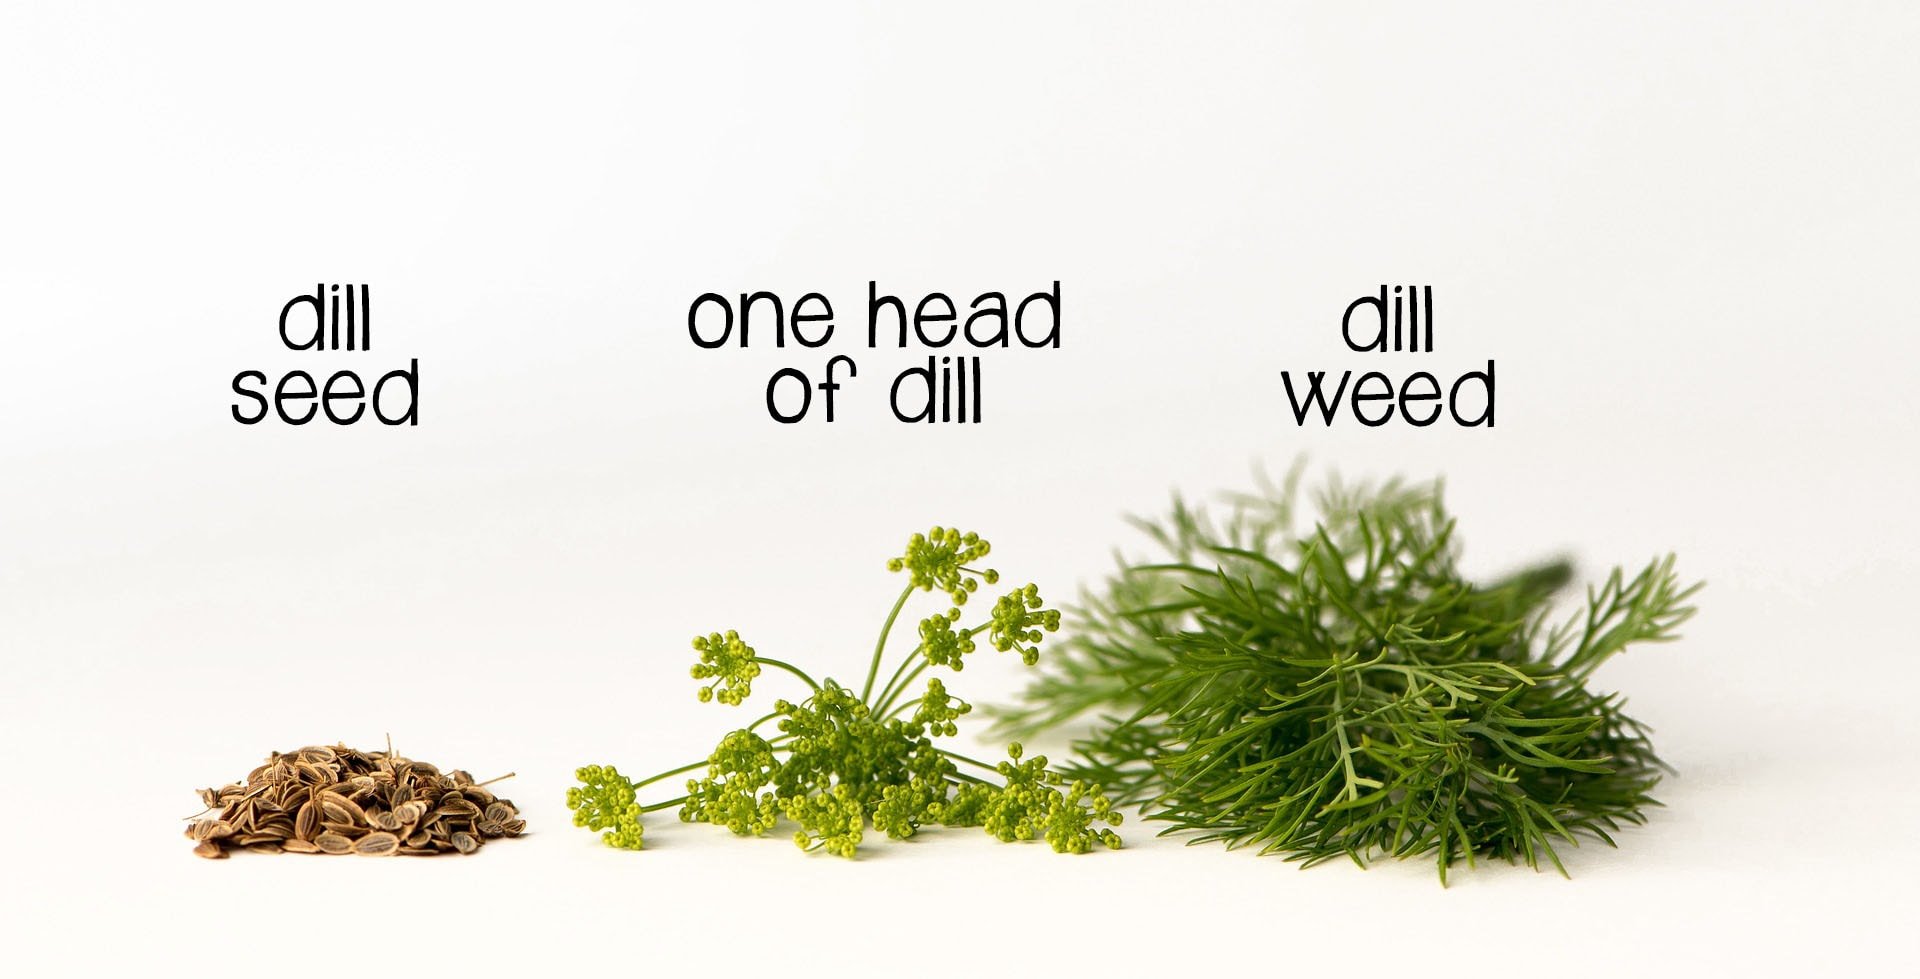 picture of dill seed, head of dill and will weed